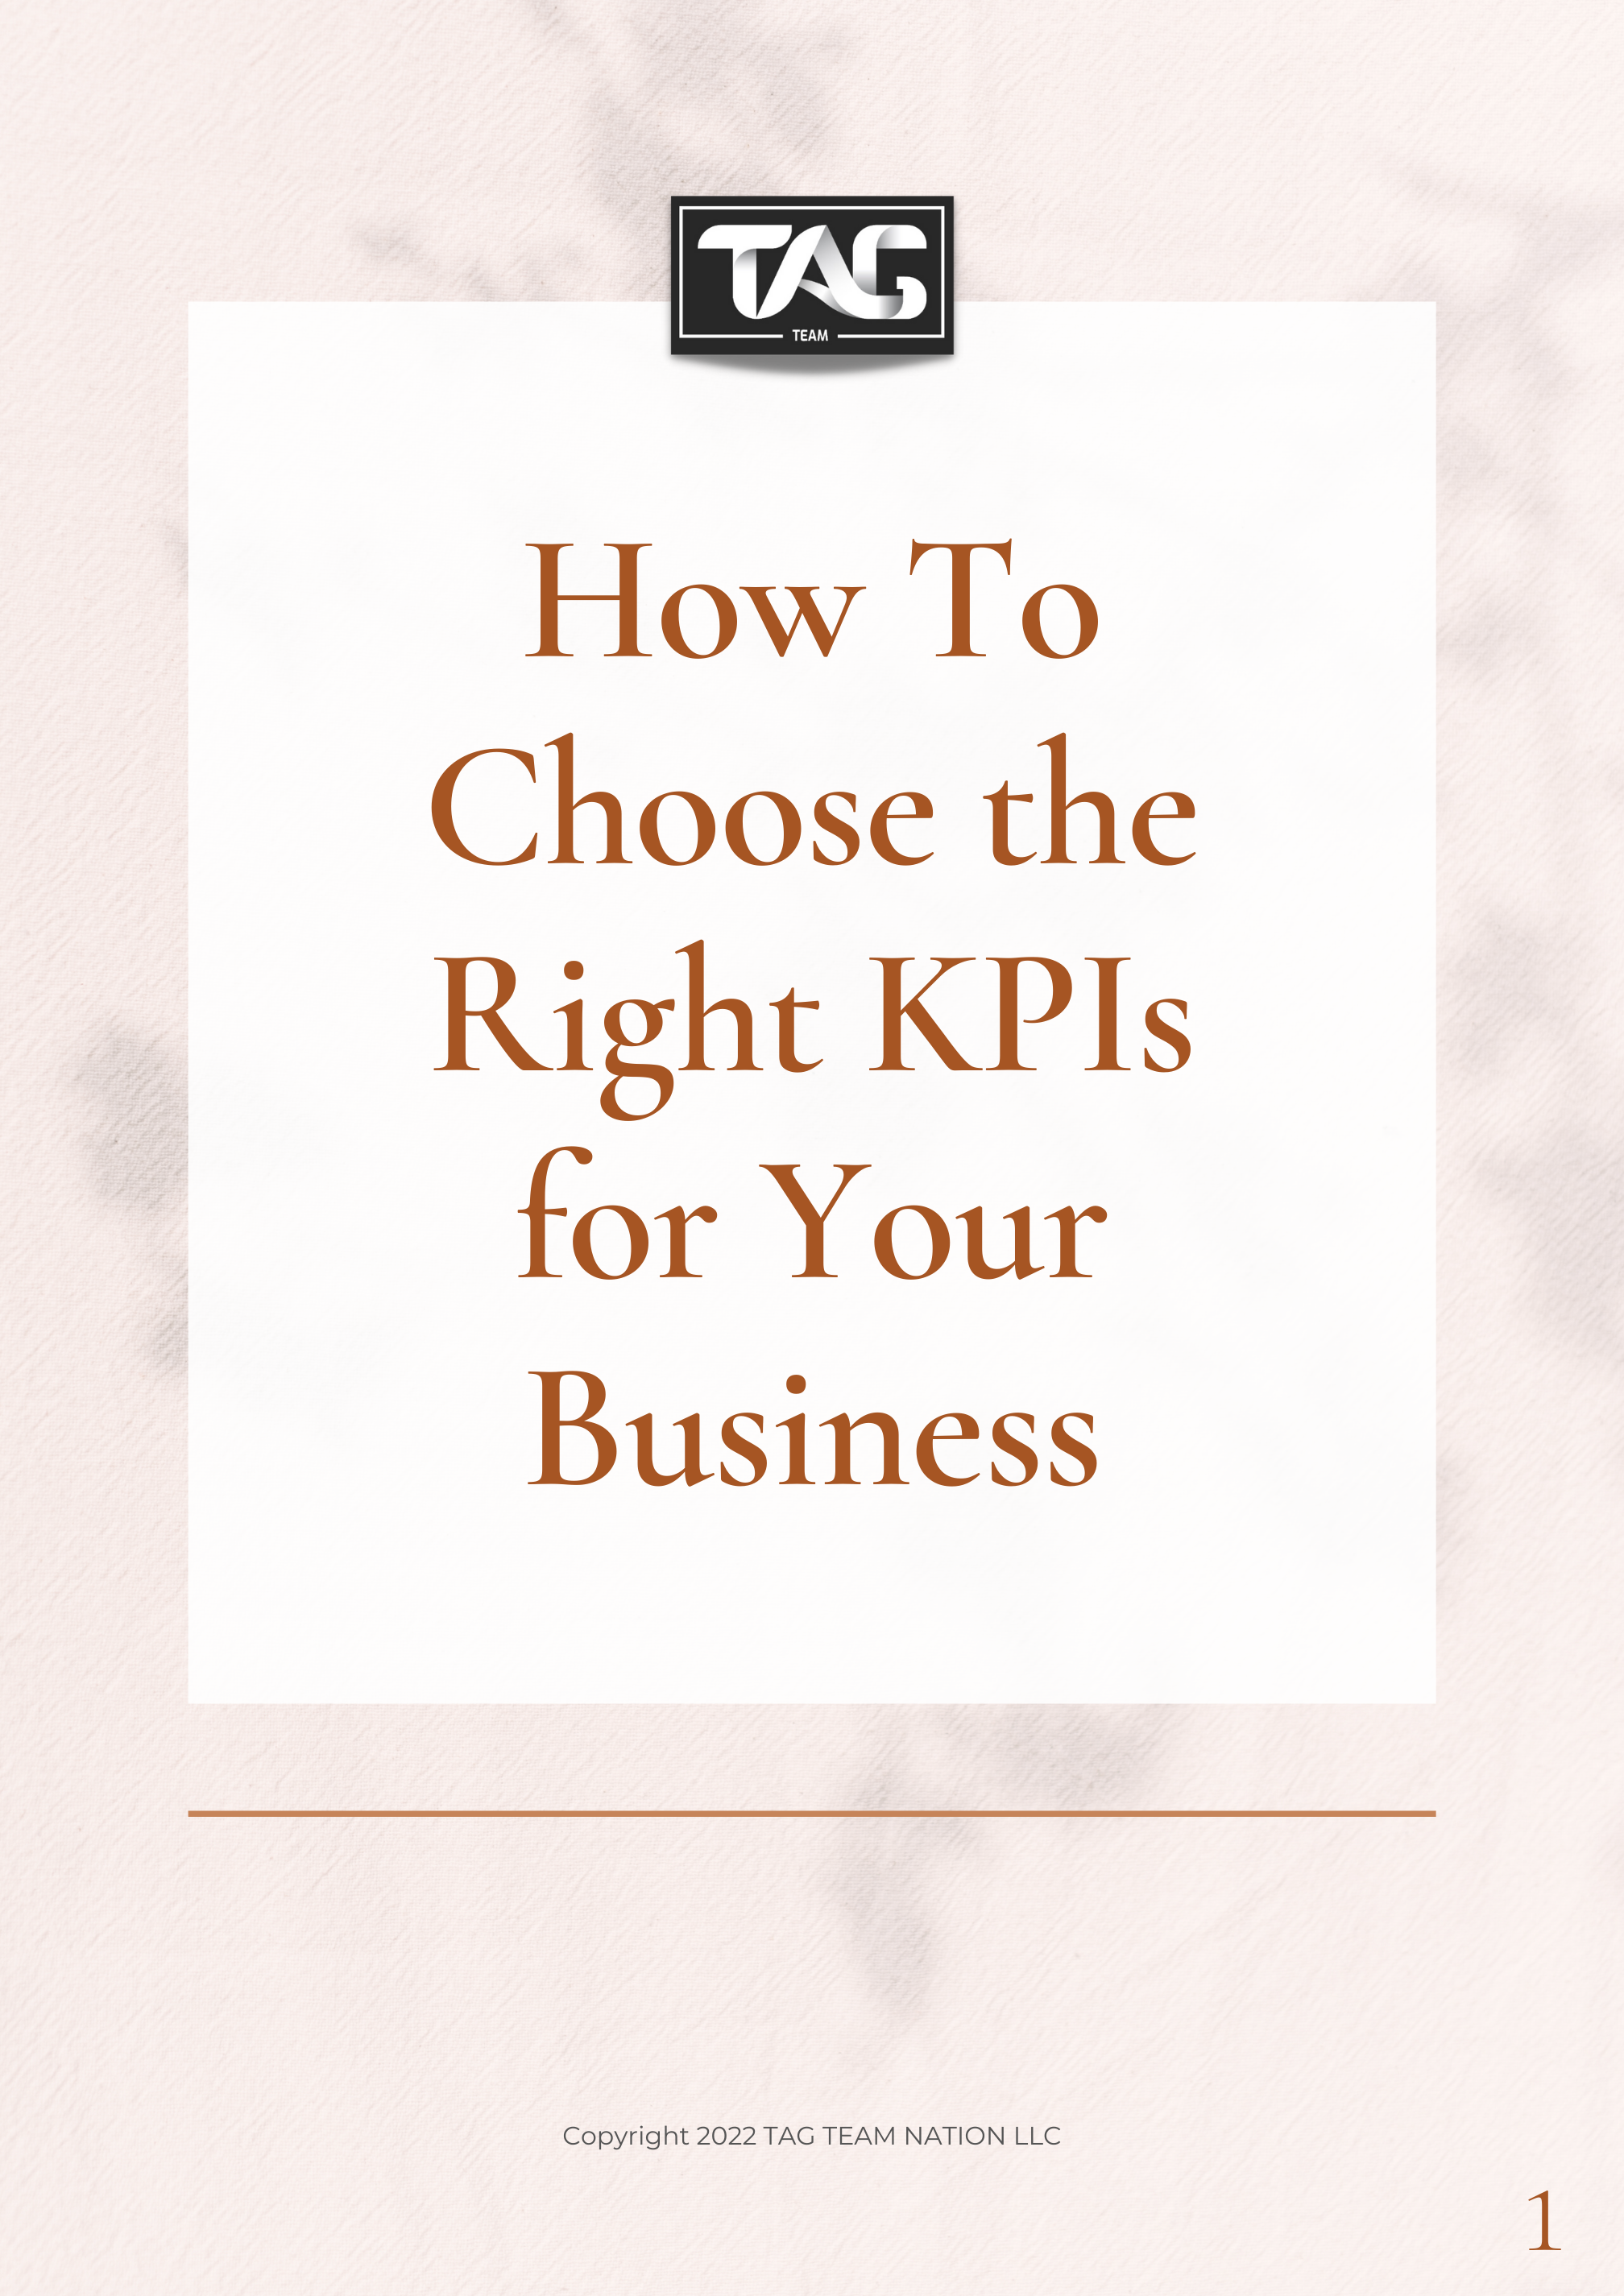 How To Choose the Right KPIs for Your Business (1)-1